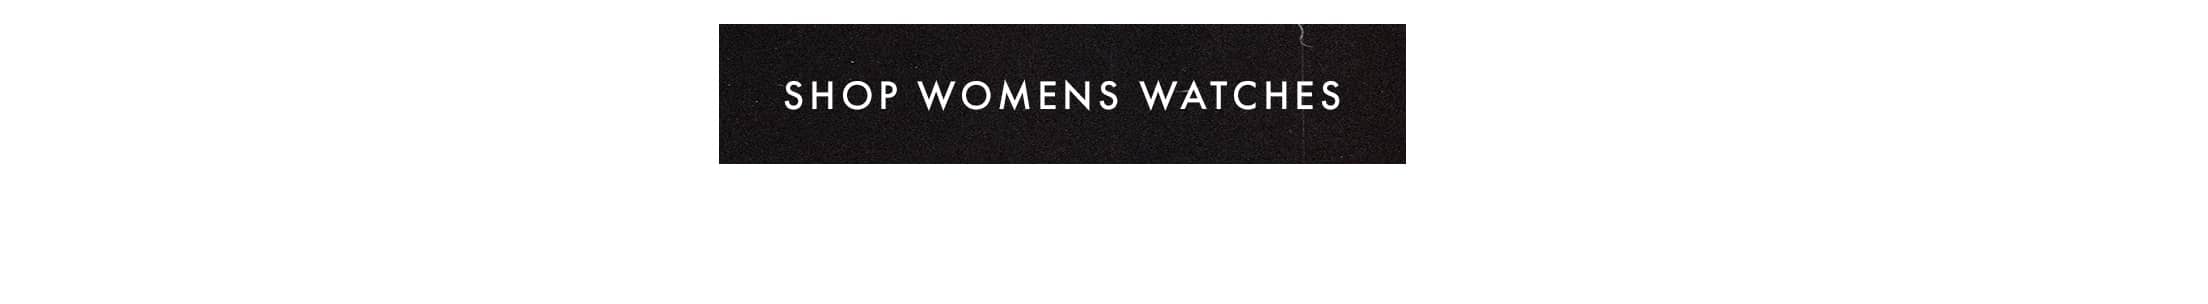 Shop Womens Watches